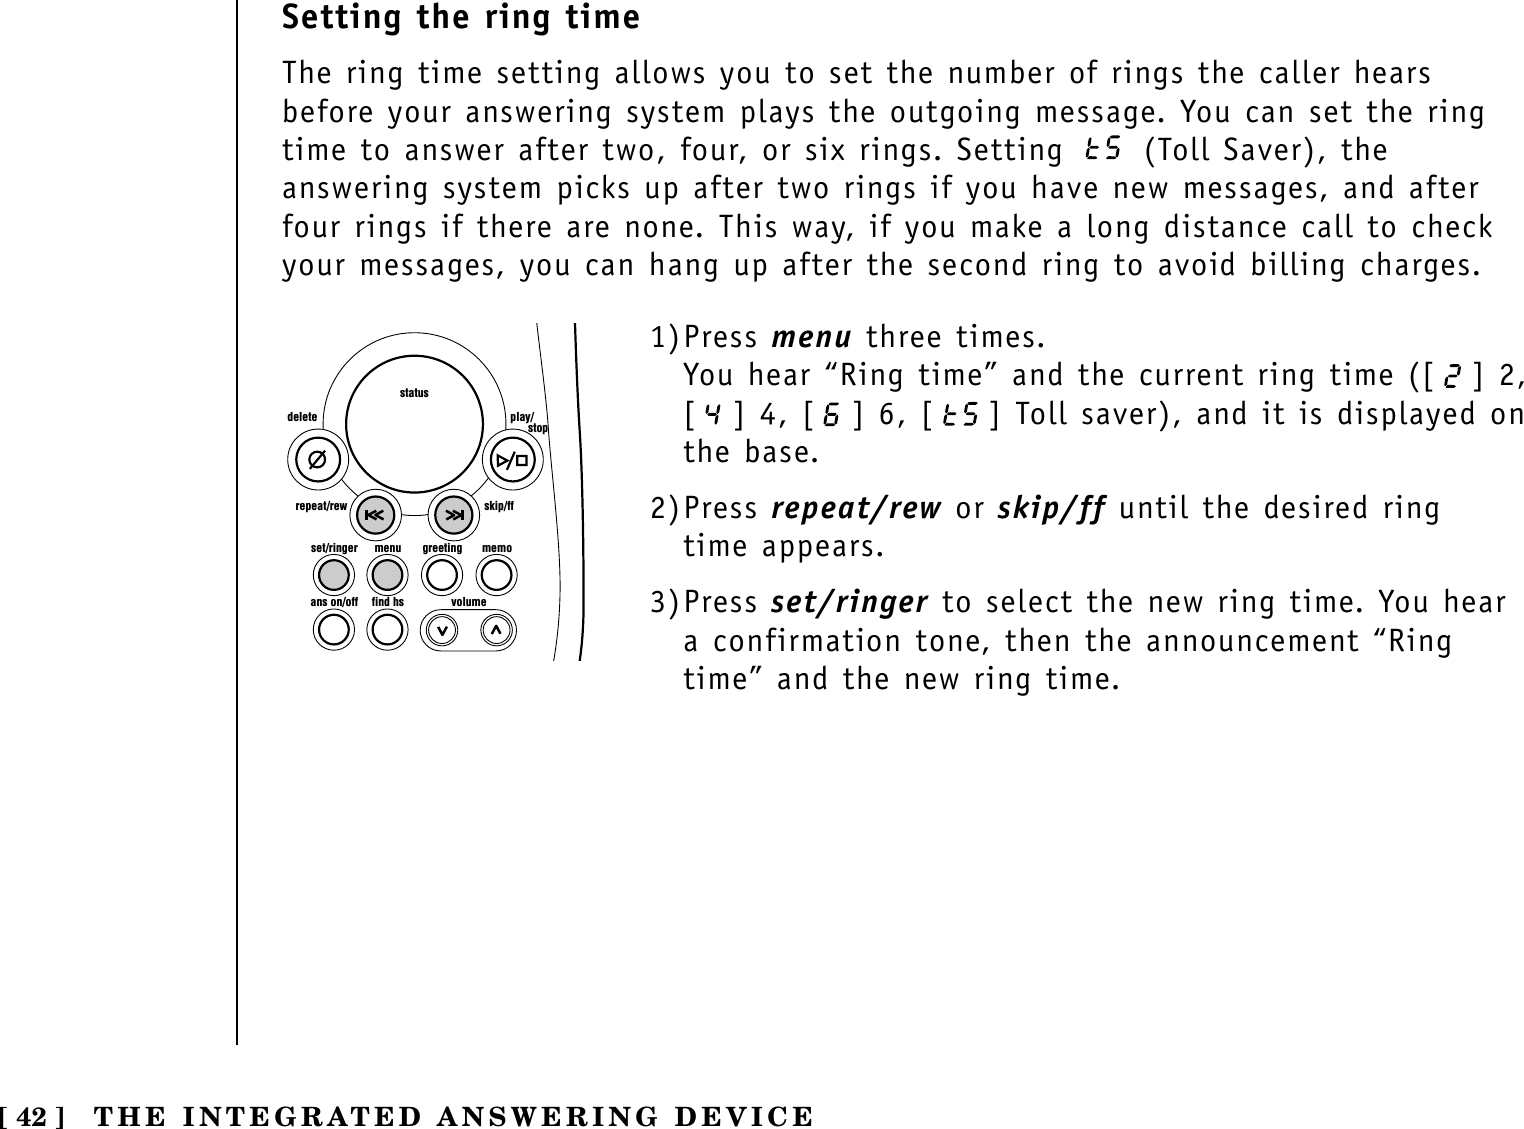 [ 42 ] THE INTEGRATED ANSWERING DEVICESetting the ring timeThe ring time setting allows you to set the number of rings the caller hearsbefore your answering system plays the outgoing message. You can set the ringtime to answer after two, four, or six rings. Setting  (Toll Saver), theanswering system picks up after two rings if you have new messages, and afterfour rings if there are none. This way, if you make a long distance call to checkyour messages, you can hang up after the second ring to avoid billing charges.set/ringer menuans on/off find hs volumegreeting memoskip/ffrepeat/rewdelete play/      stopstatus1)Press menu three times.You hear “Ring time” and the current ring time ([ ] 2,[ ] 4, [ ] 6, [ ] Toll saver), and it is displayed onthe base.2)Press repeat/rew or skip/ff until the desired ring time appears.3)Press set/ringer to select the new ring time. You heara confirmation tone, then the announcement “Ringtime” and the new ring time.